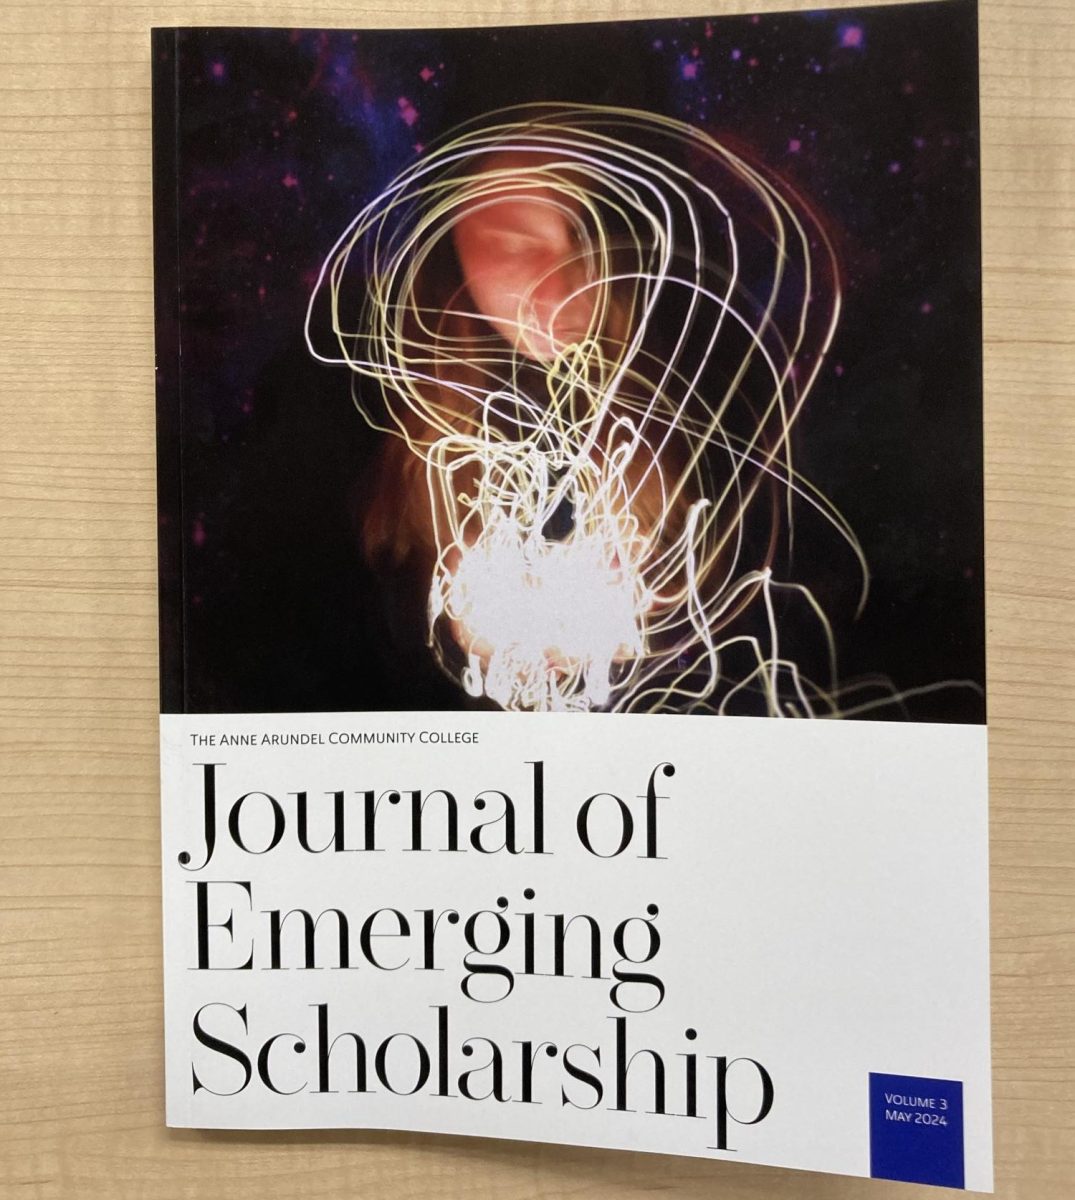 AACC released the third annual volume of the Journal of Emerging Scholarship this semester.